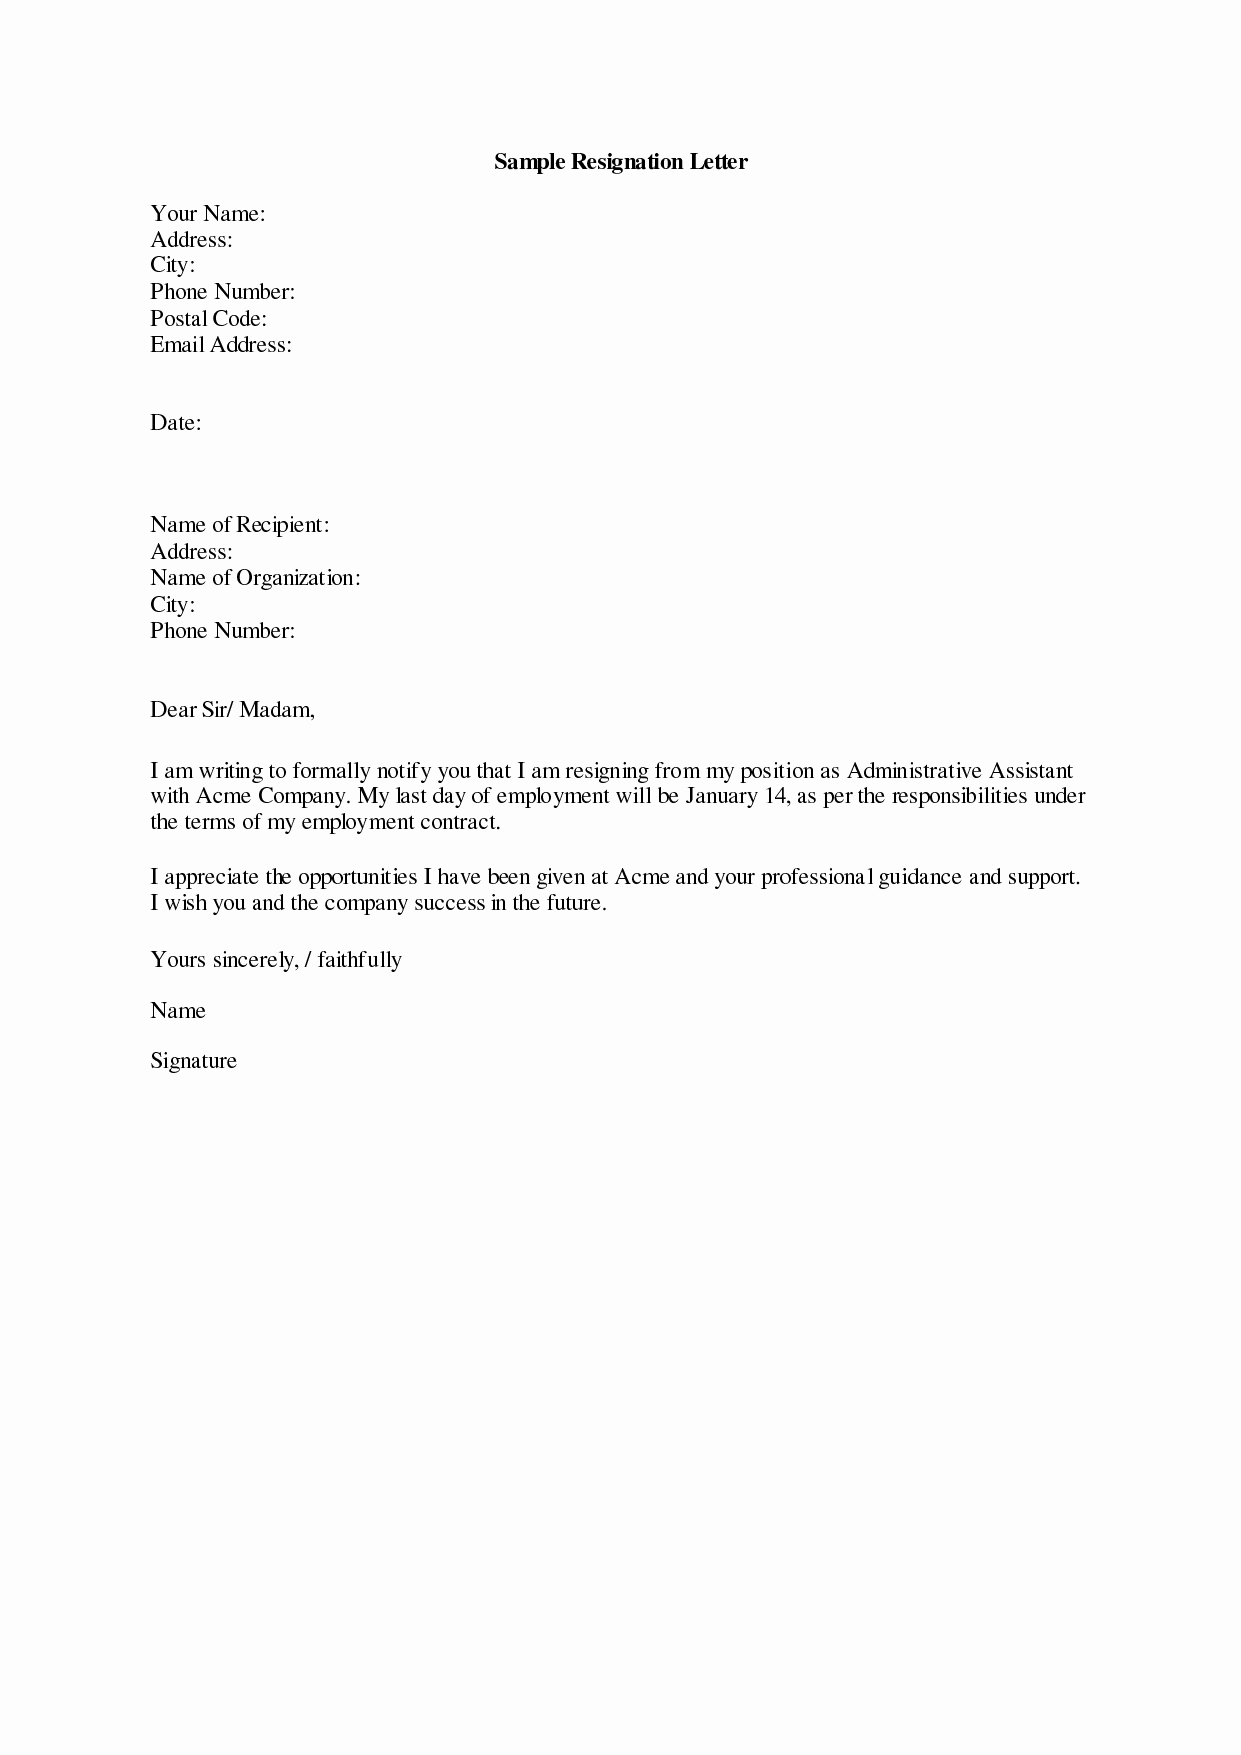 Resignation Letter Effective Immediately Inspirational Dos and Don Ts for A Resignation Letter